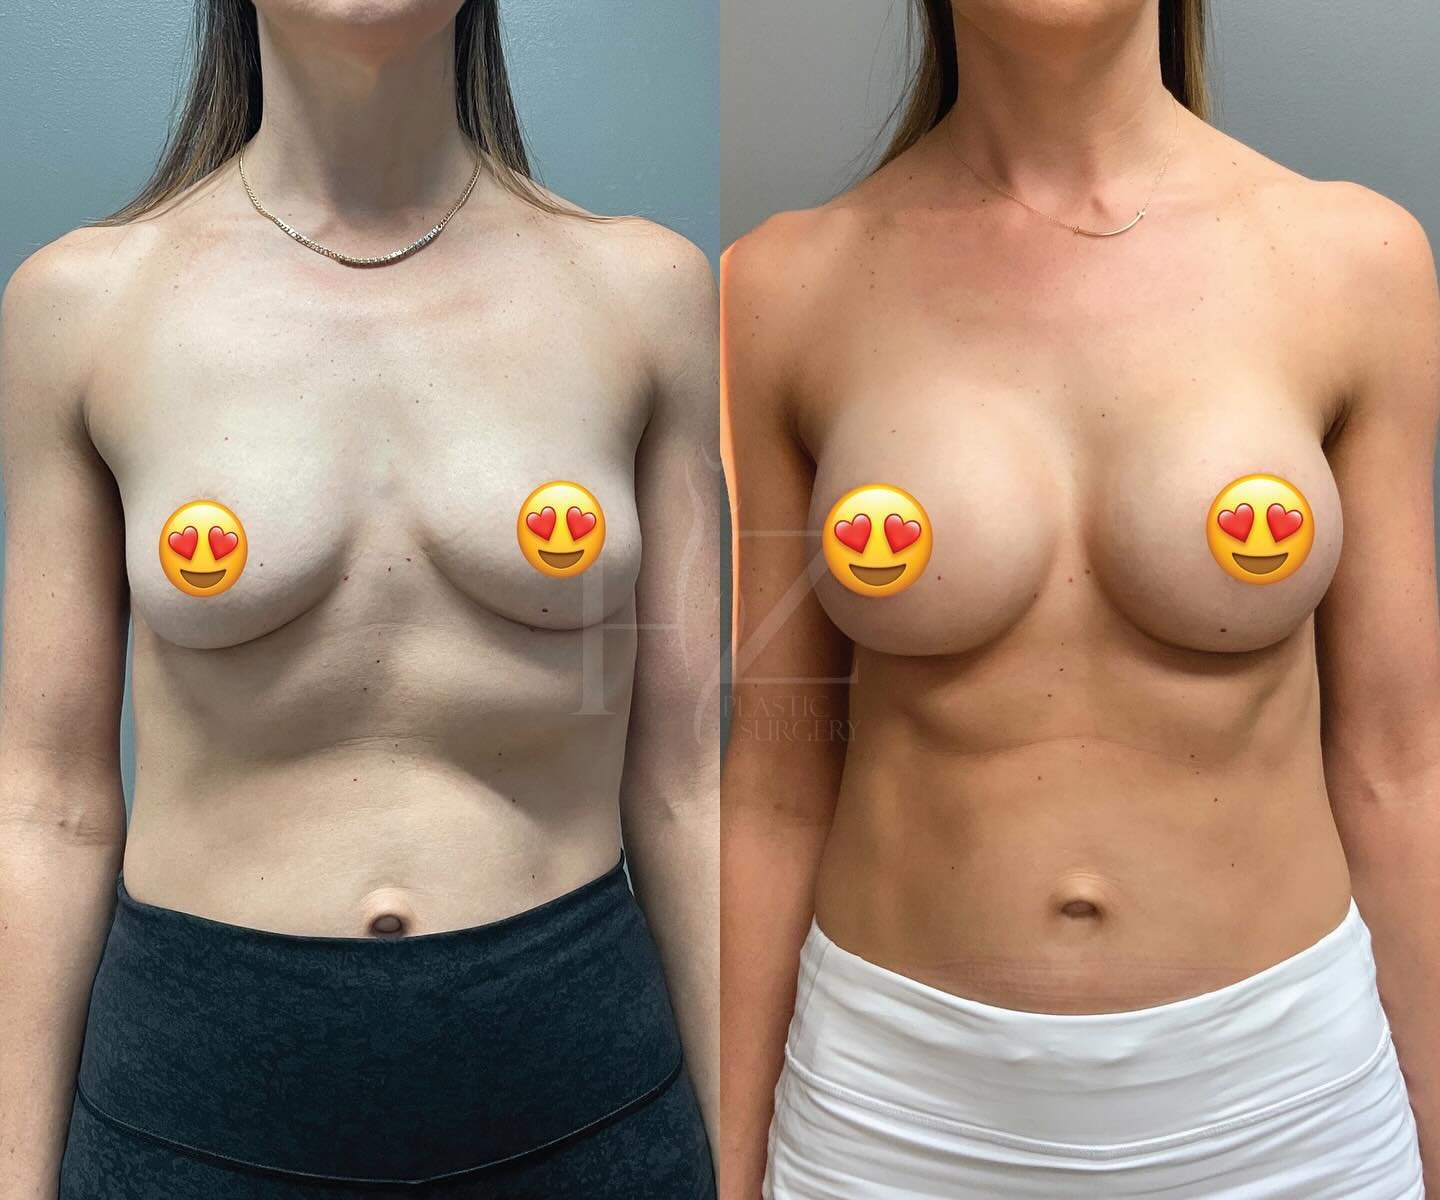 Enhanced volume and shape with full profile 345cc implants 🍒 
@drlylyhzps performed a breast augmentation on our gorgeous patient for these beautiful results at 6 weeks post-op!

𝐏𝐫𝐞-𝐎𝐩 𝐒𝐭𝐚𝐭𝐬:
Age: 39, Height: 5ft 9in, Weight: 130lbs, BMI: